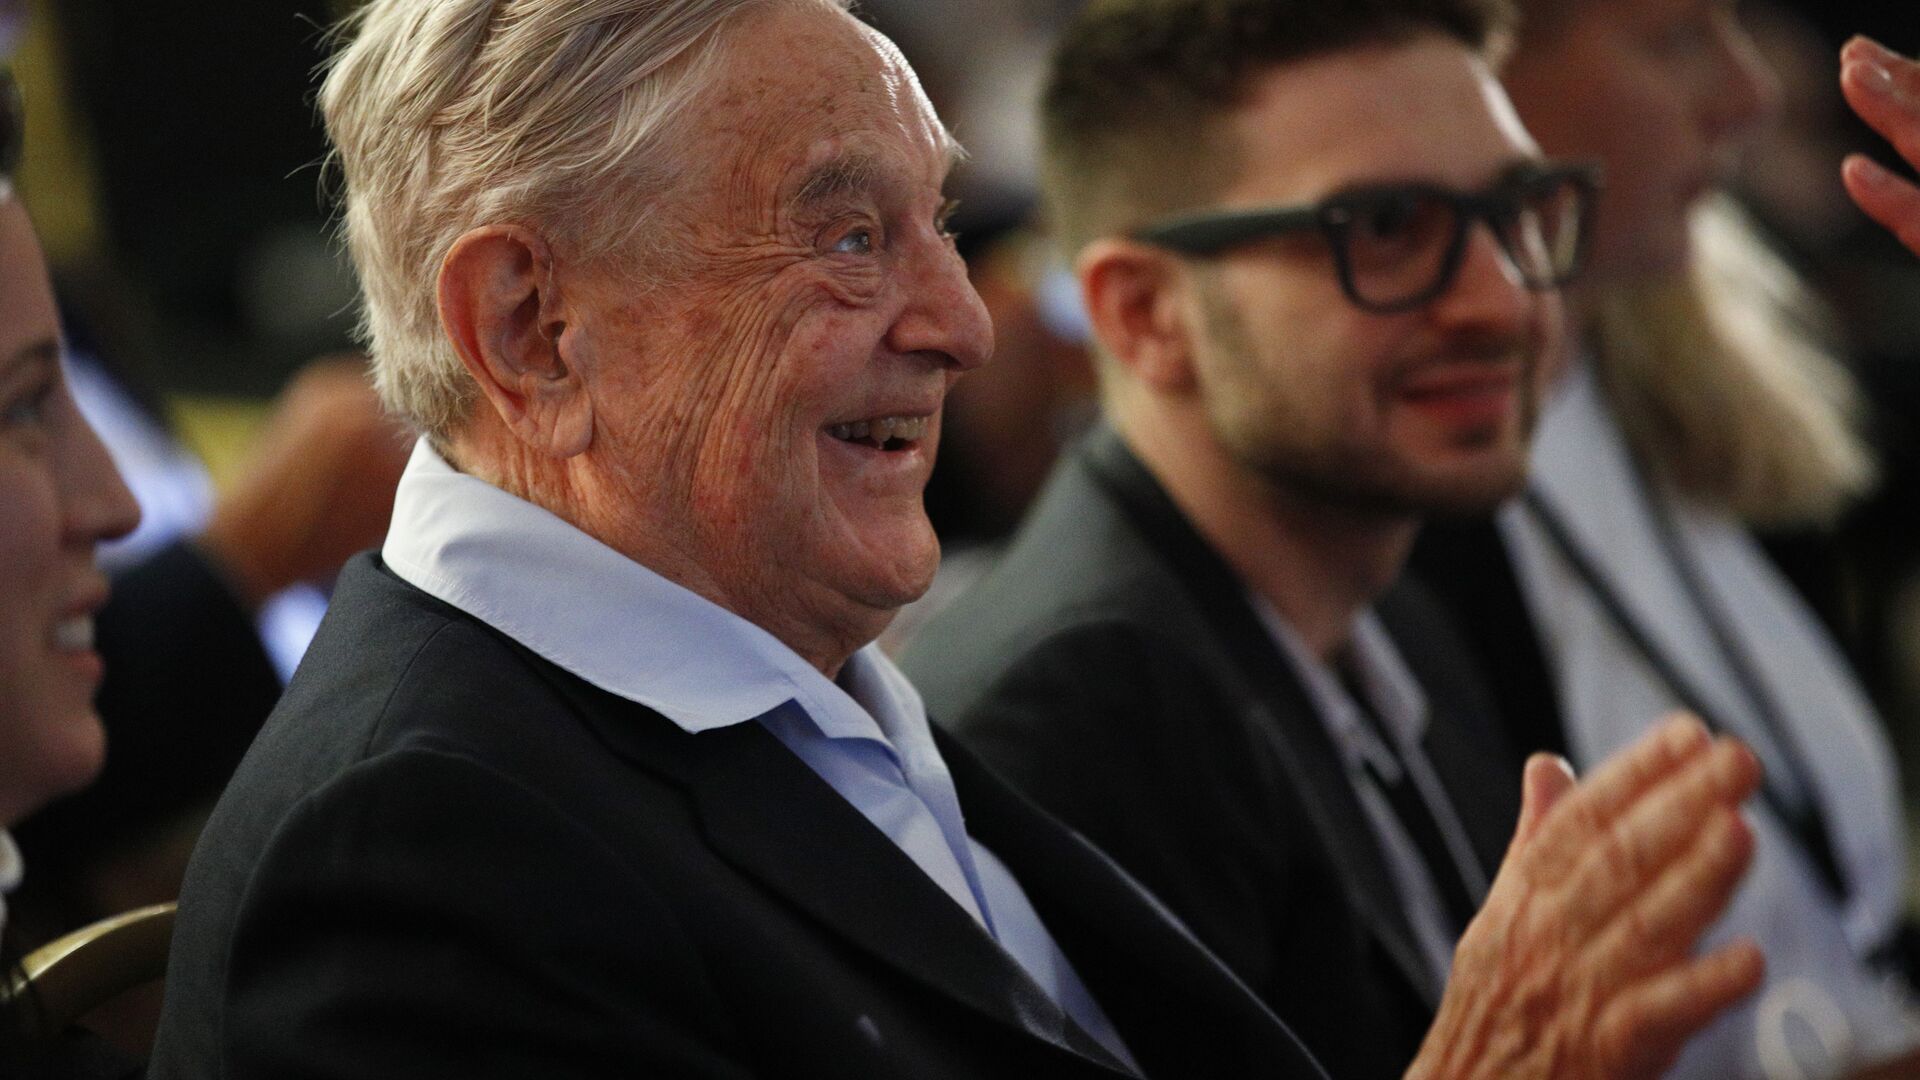 George Soros, Founder and Chairman of the Open Society Foundations attends the European Council On Foreign Relations Annual Council Meeting in Paris, Tuesday, May 29, 2018 - Sputnik International, 1920, 12.05.2022